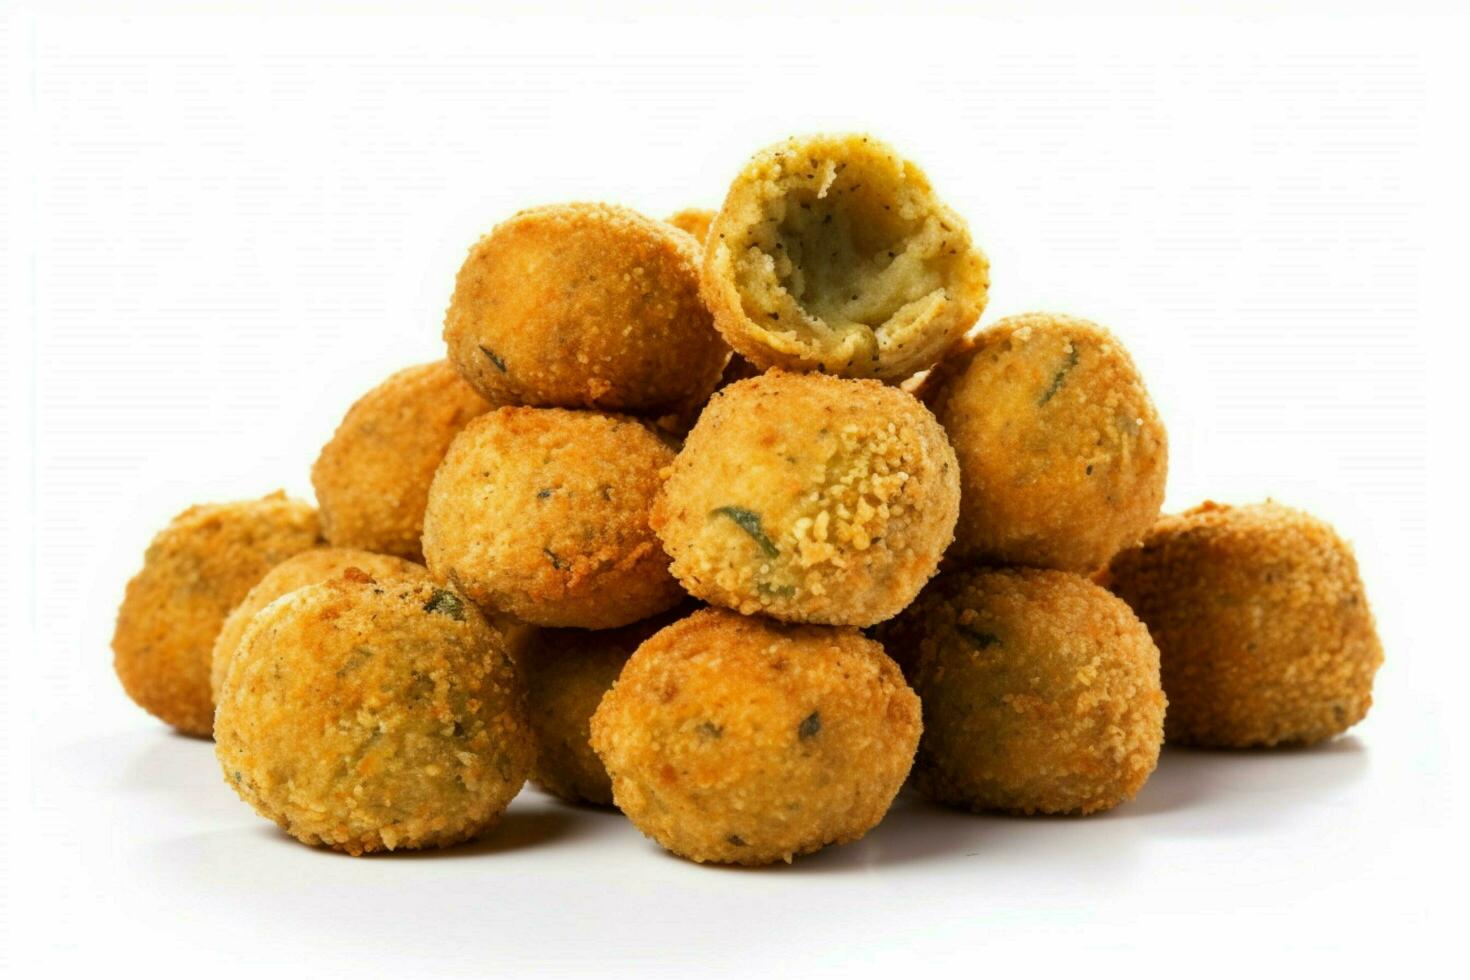 photo of falafel with no background